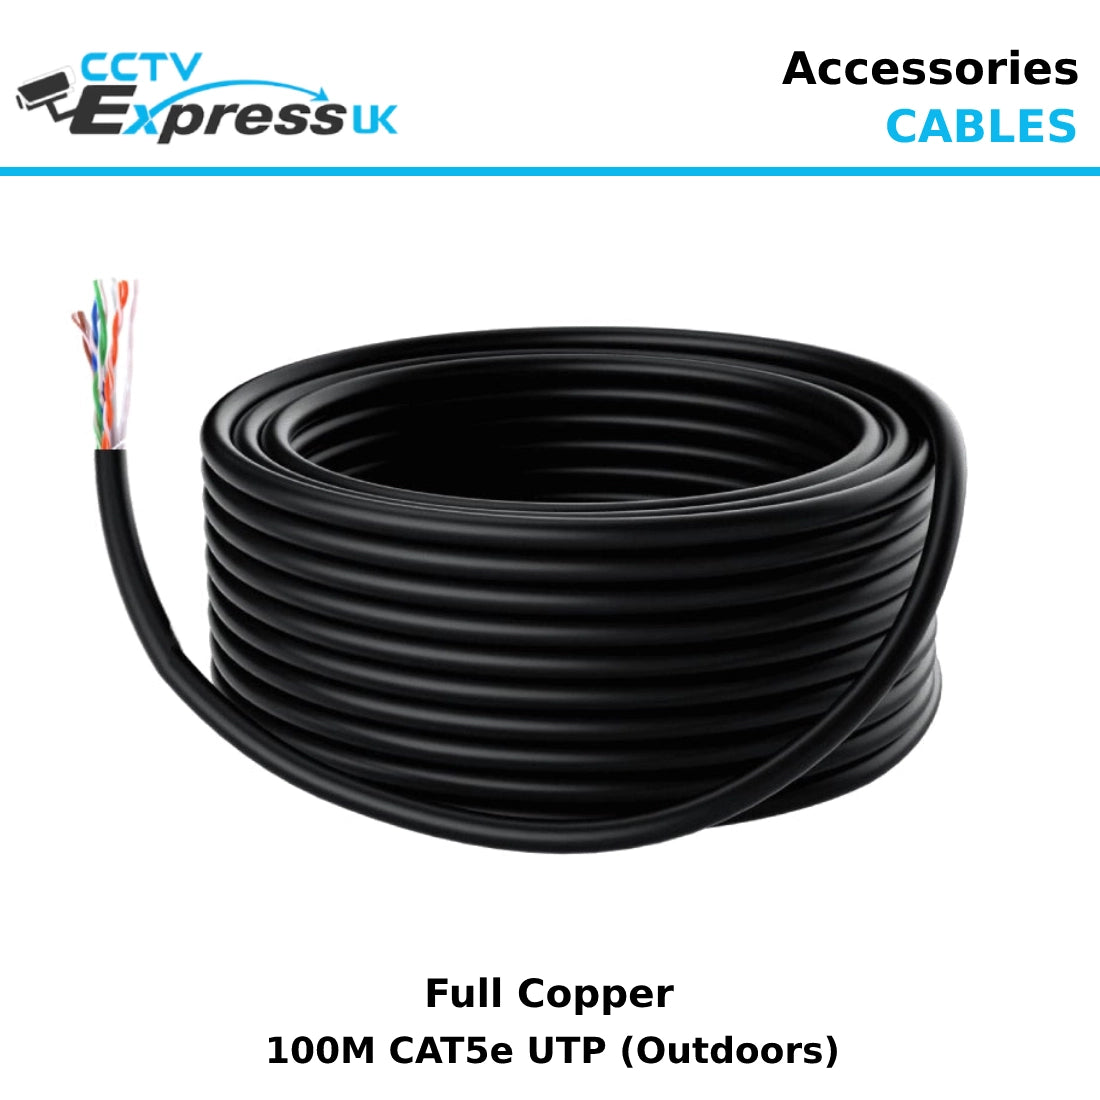 CAT5e Outdoor UTP Networking Cable - Black - 100m – CCTV Express UK